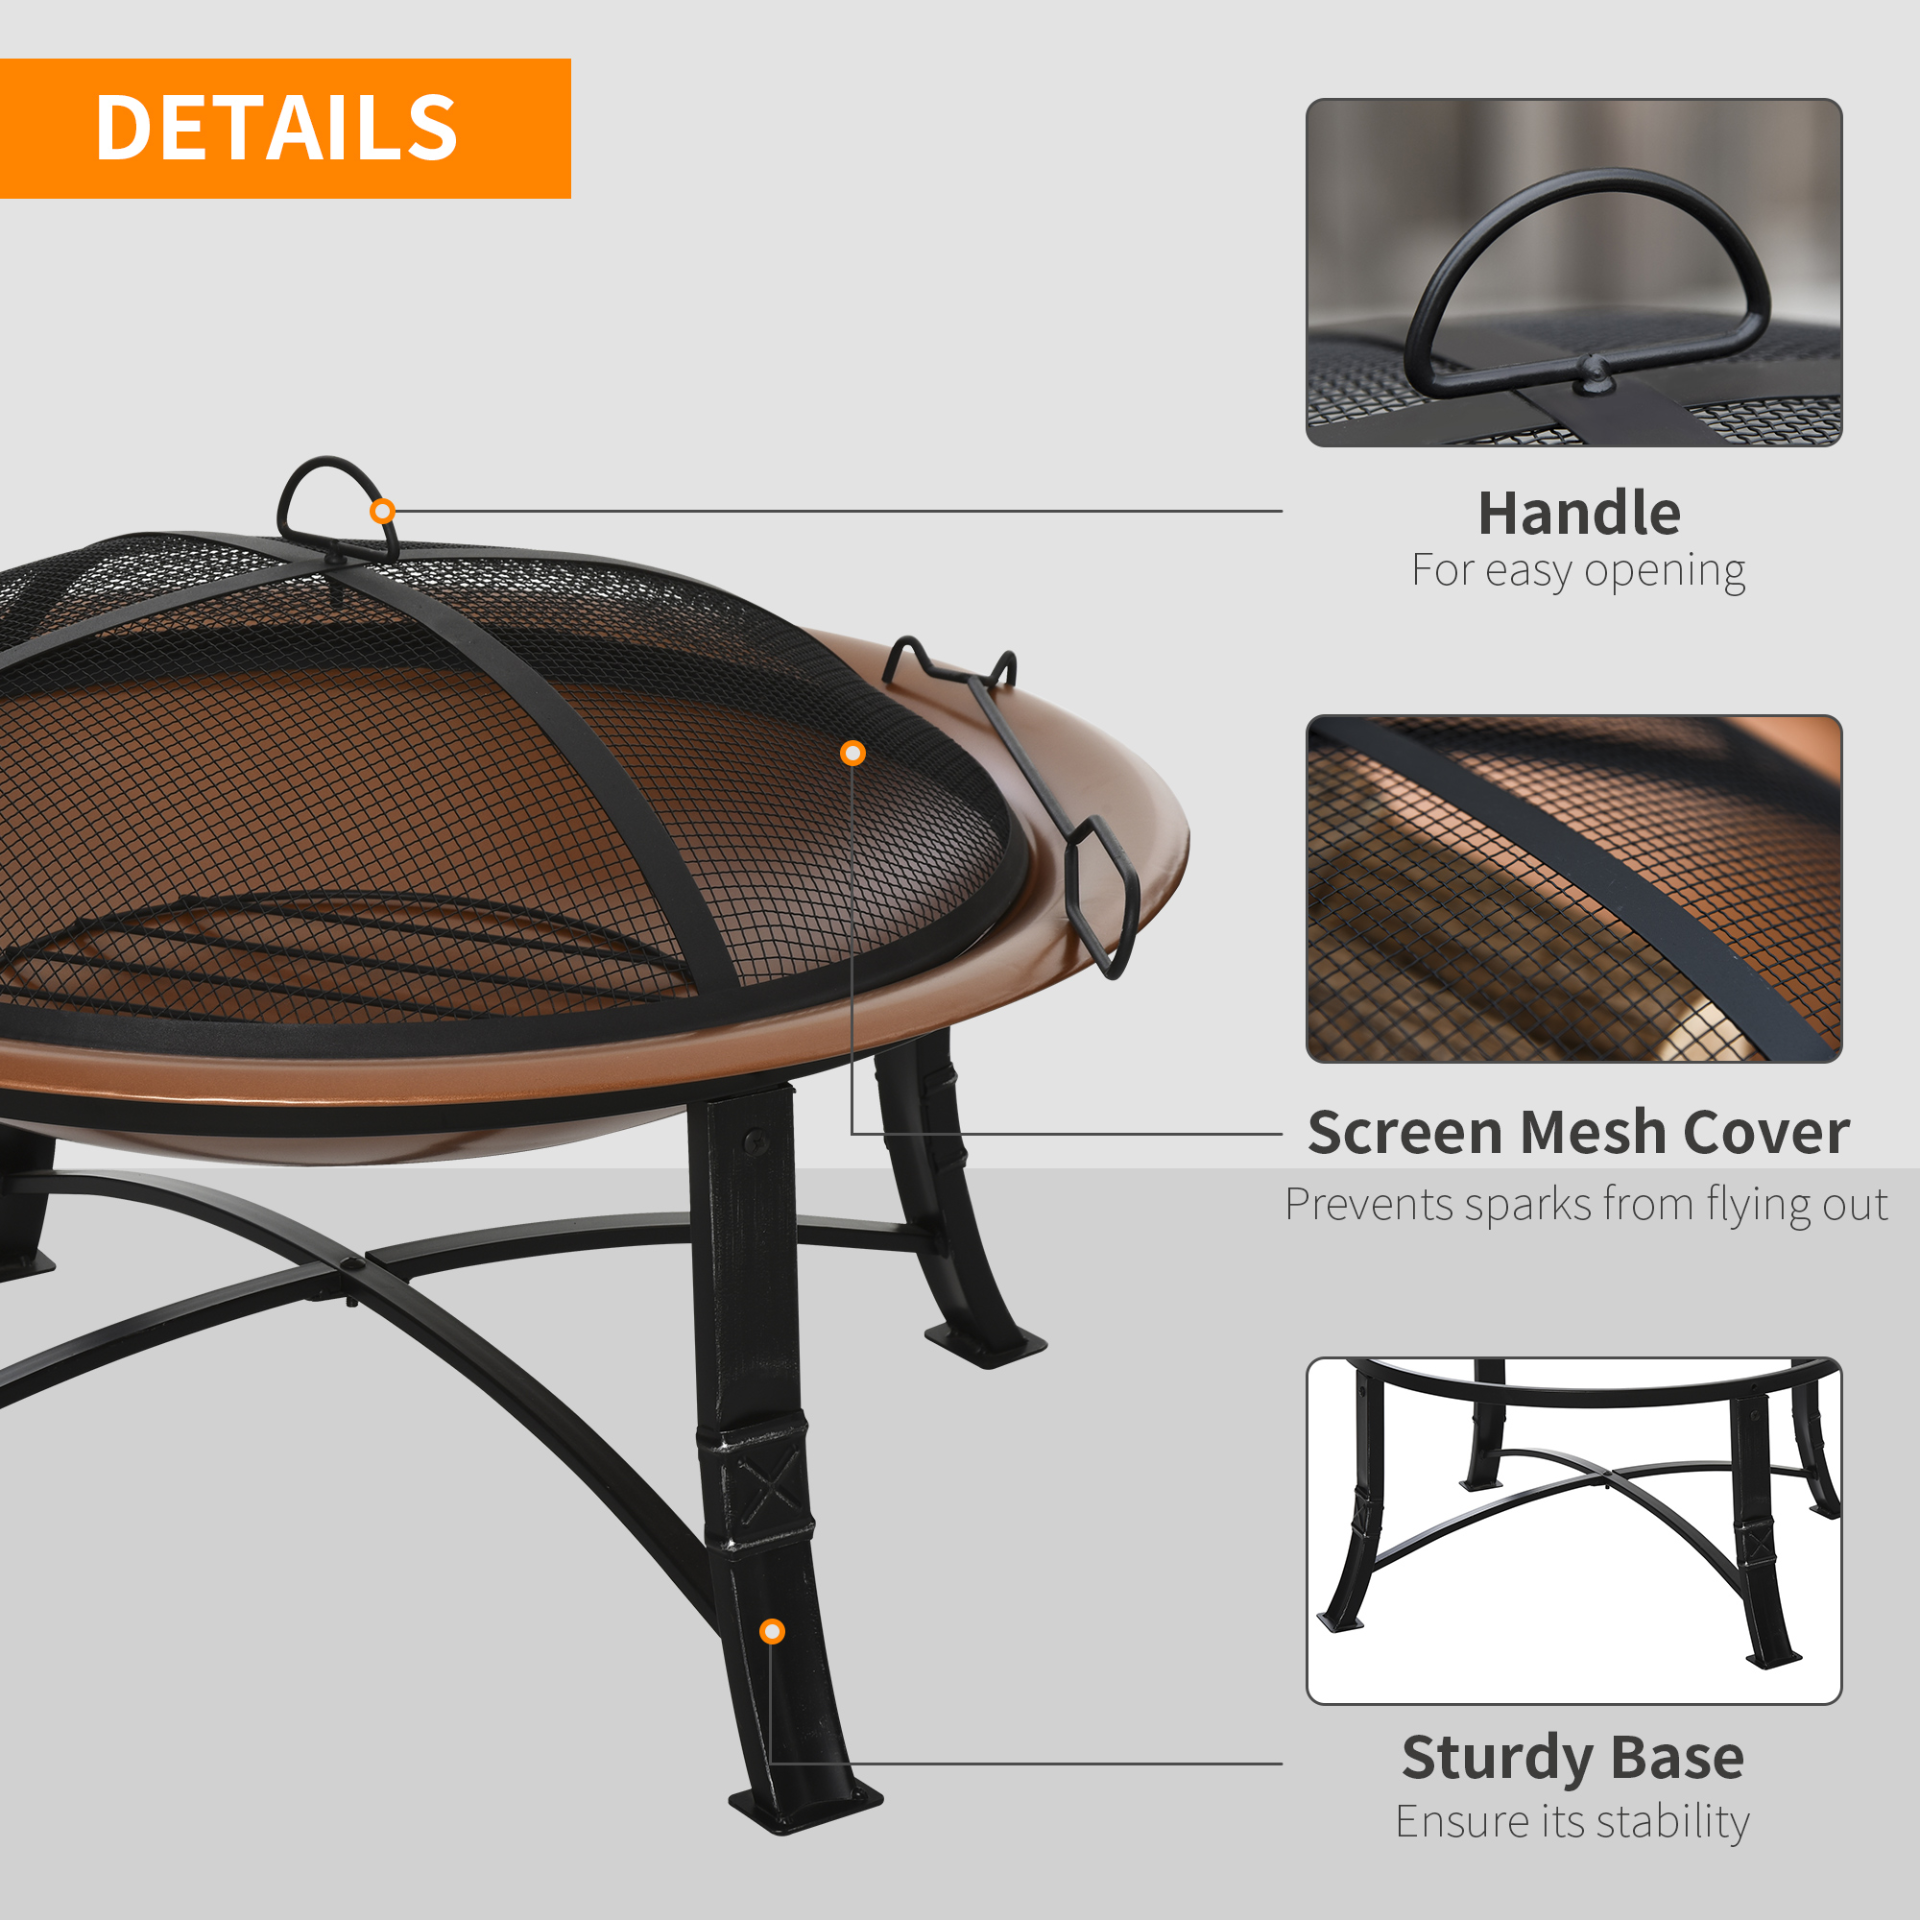 Outsunny Metal Large Firepit Bowl Outdoor Round Fire Pit with Lid, Log Grate, and Poker - Bronze Firepit Cosy Camping Co.   